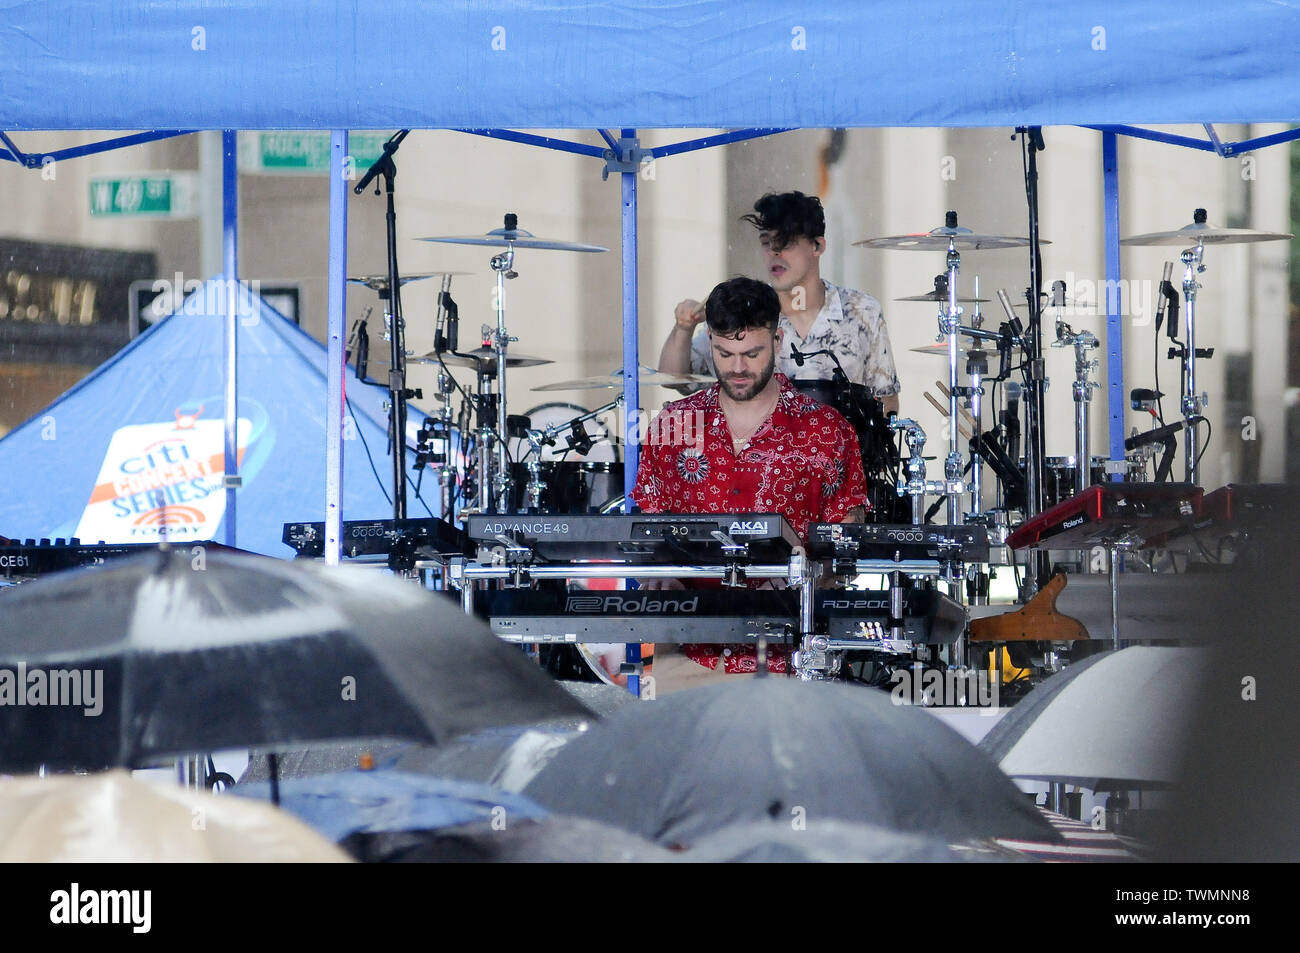 New York City, NY, USA. 21st June, 2019. Alexander Pall performs during the Chainsmokers performance of NBC's Today Show Citi Concert Series with Bebe Rexha, Bulow and Ty Dolla $ign as special guests in New York City. Credit: Efren Landaos/SOPA Images/ZUMA Wire/Alamy Live News Stock Photo